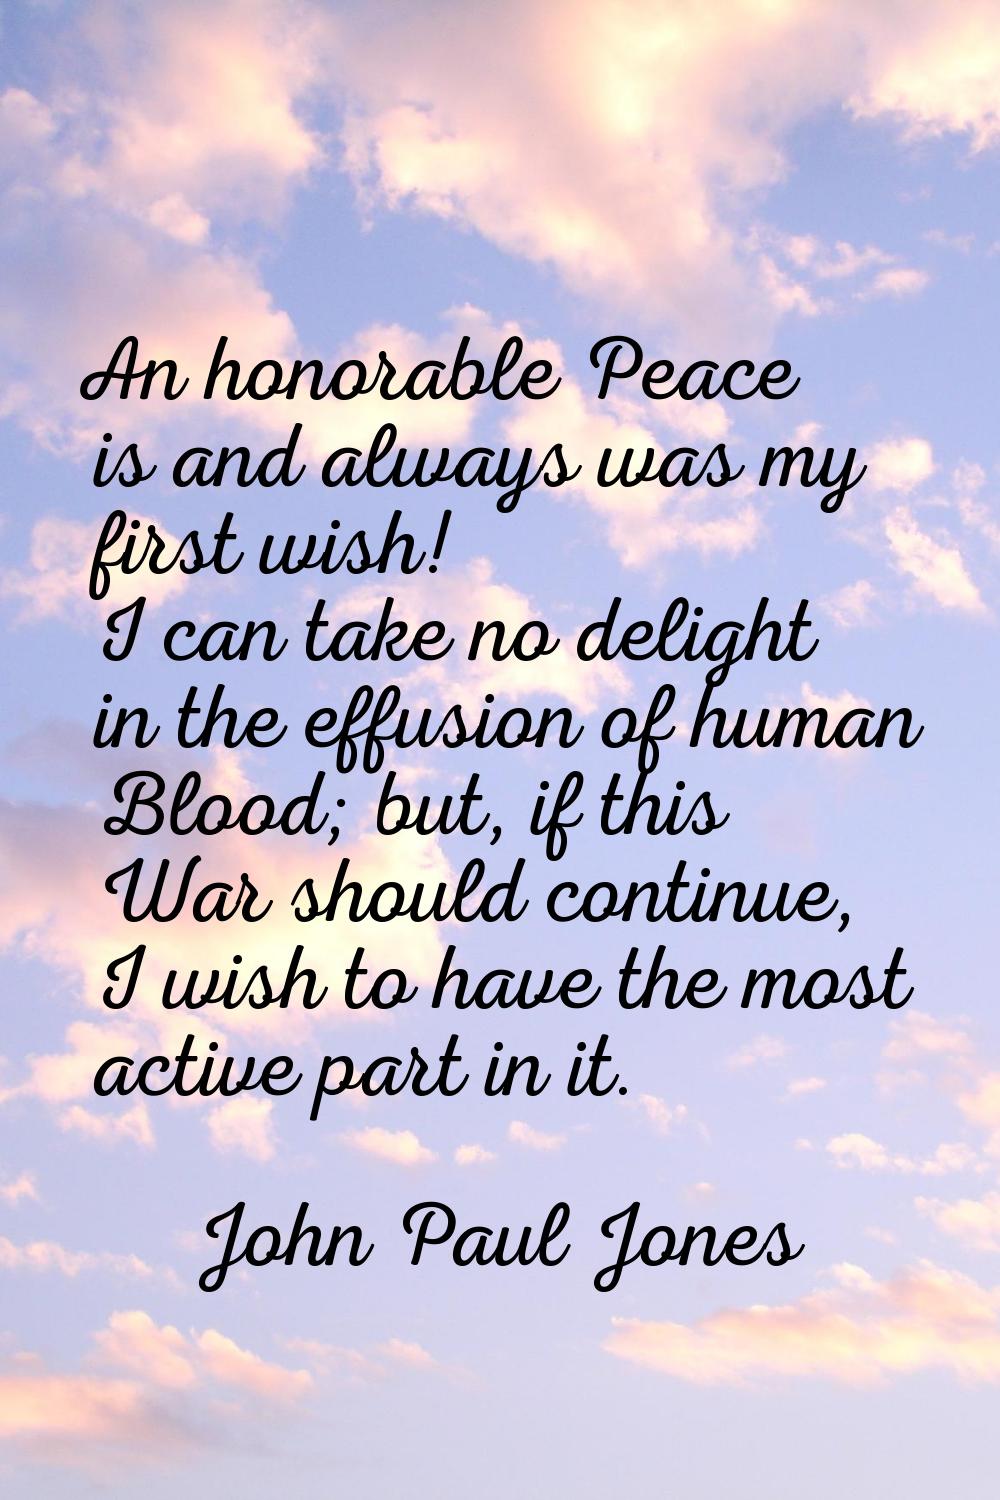 An honorable Peace is and always was my first wish! I can take no delight in the effusion of human 